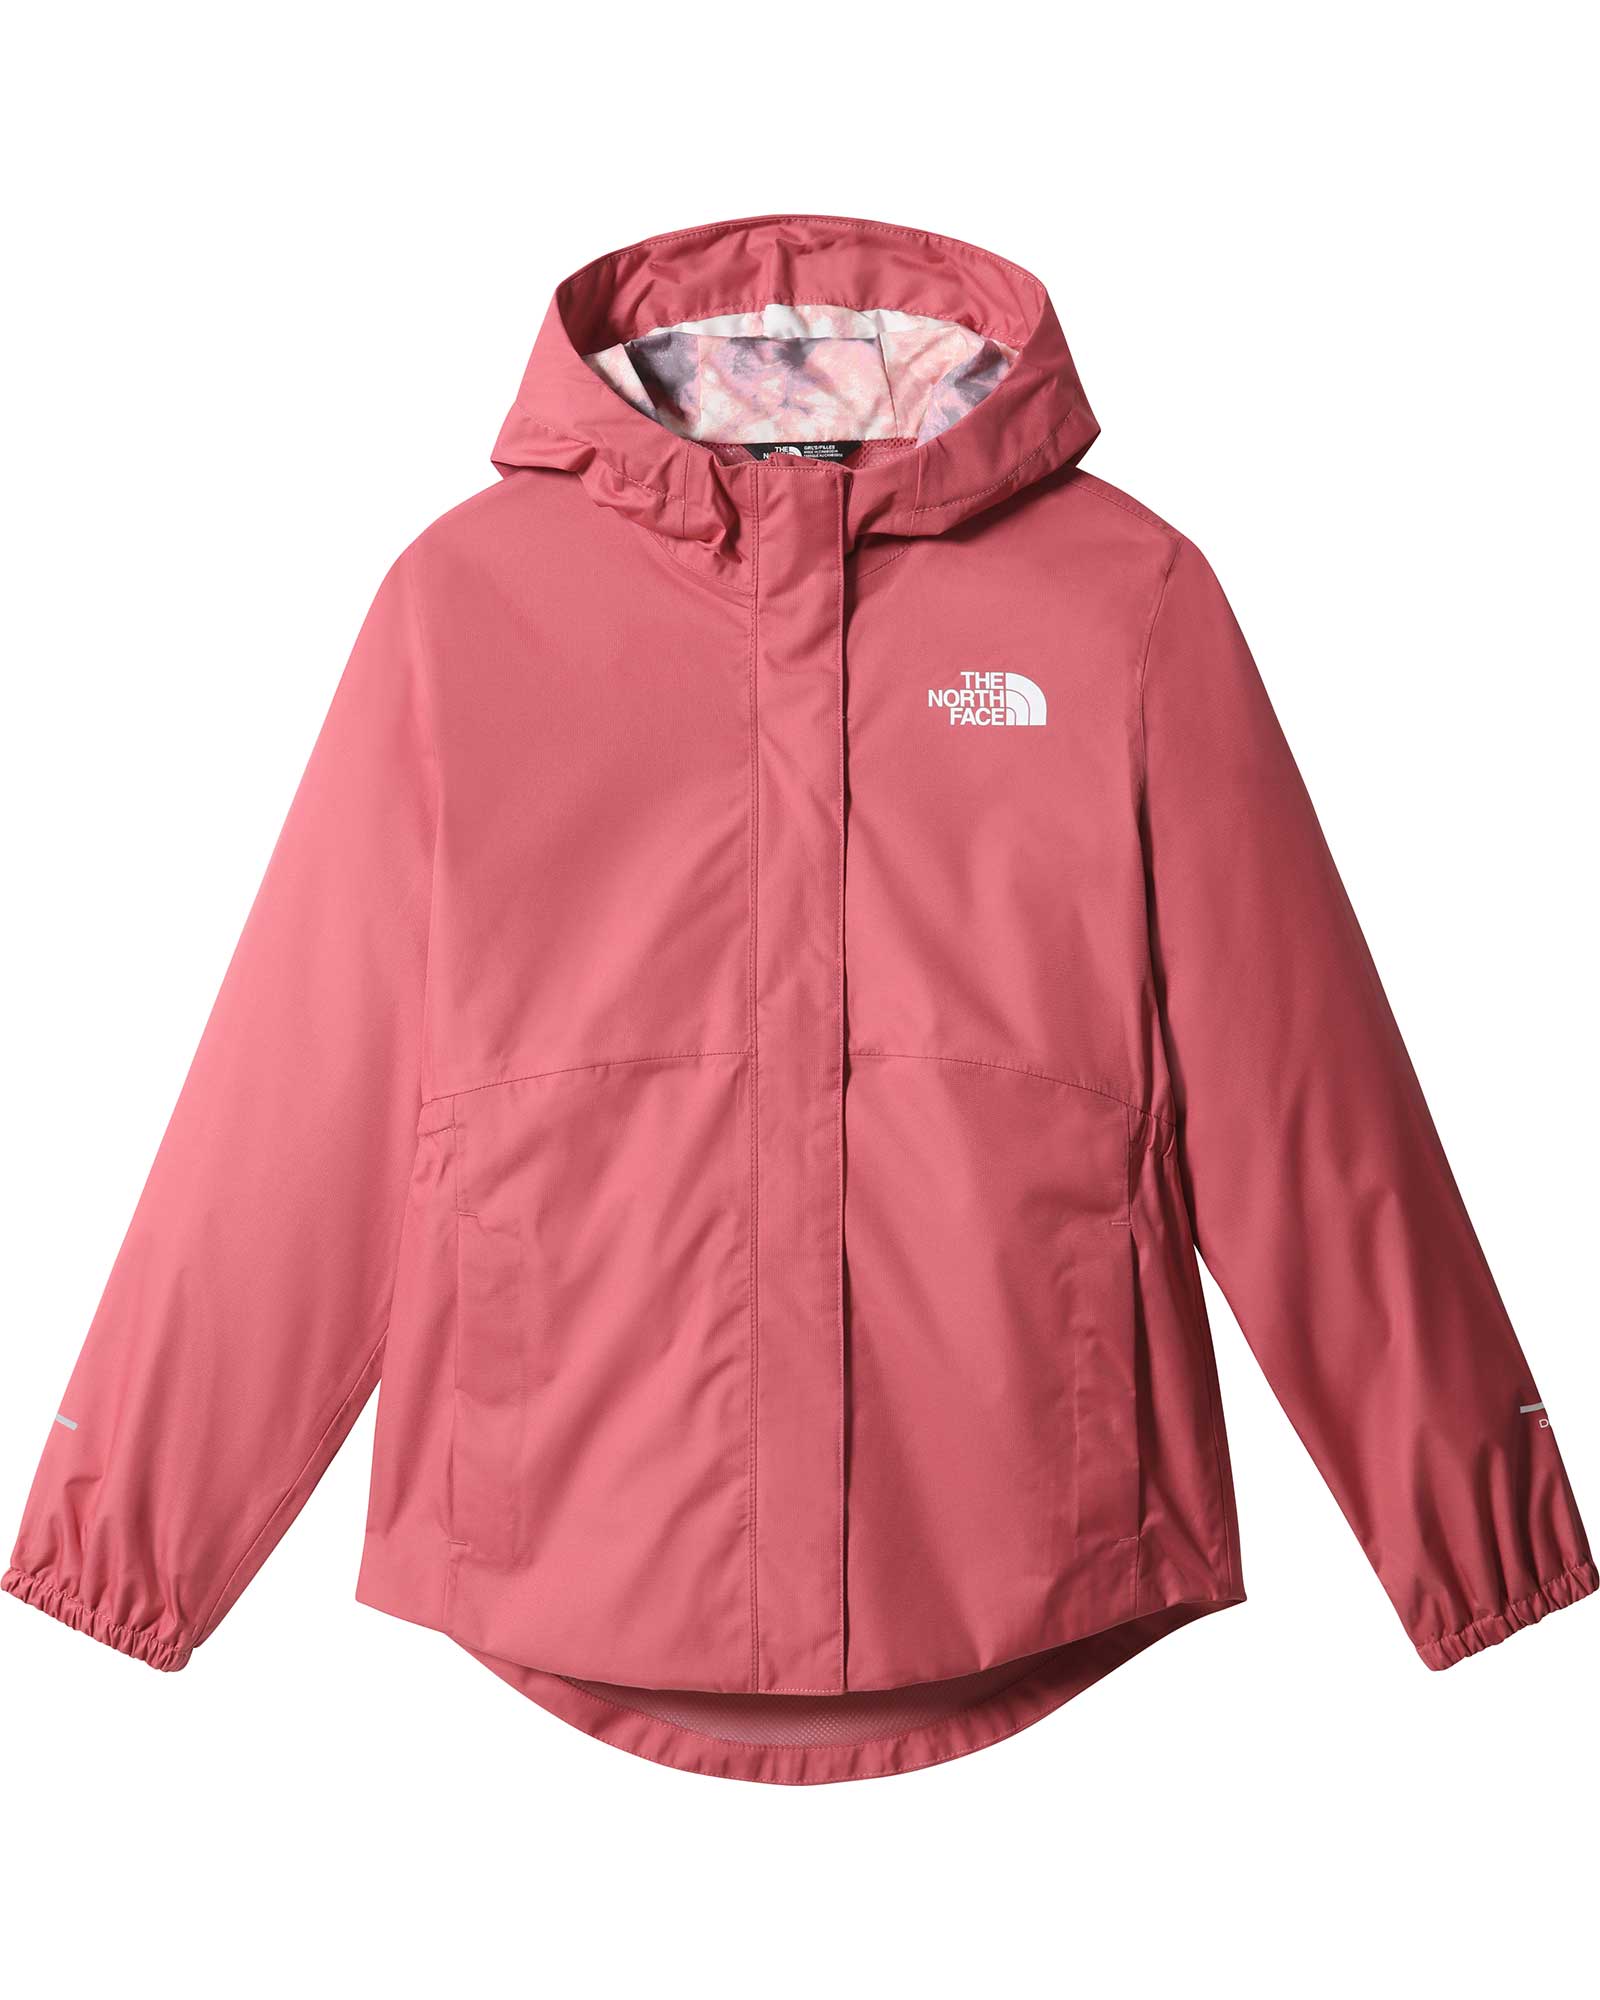 Product image of The North Face Antora Girls' Rain Jacket XL